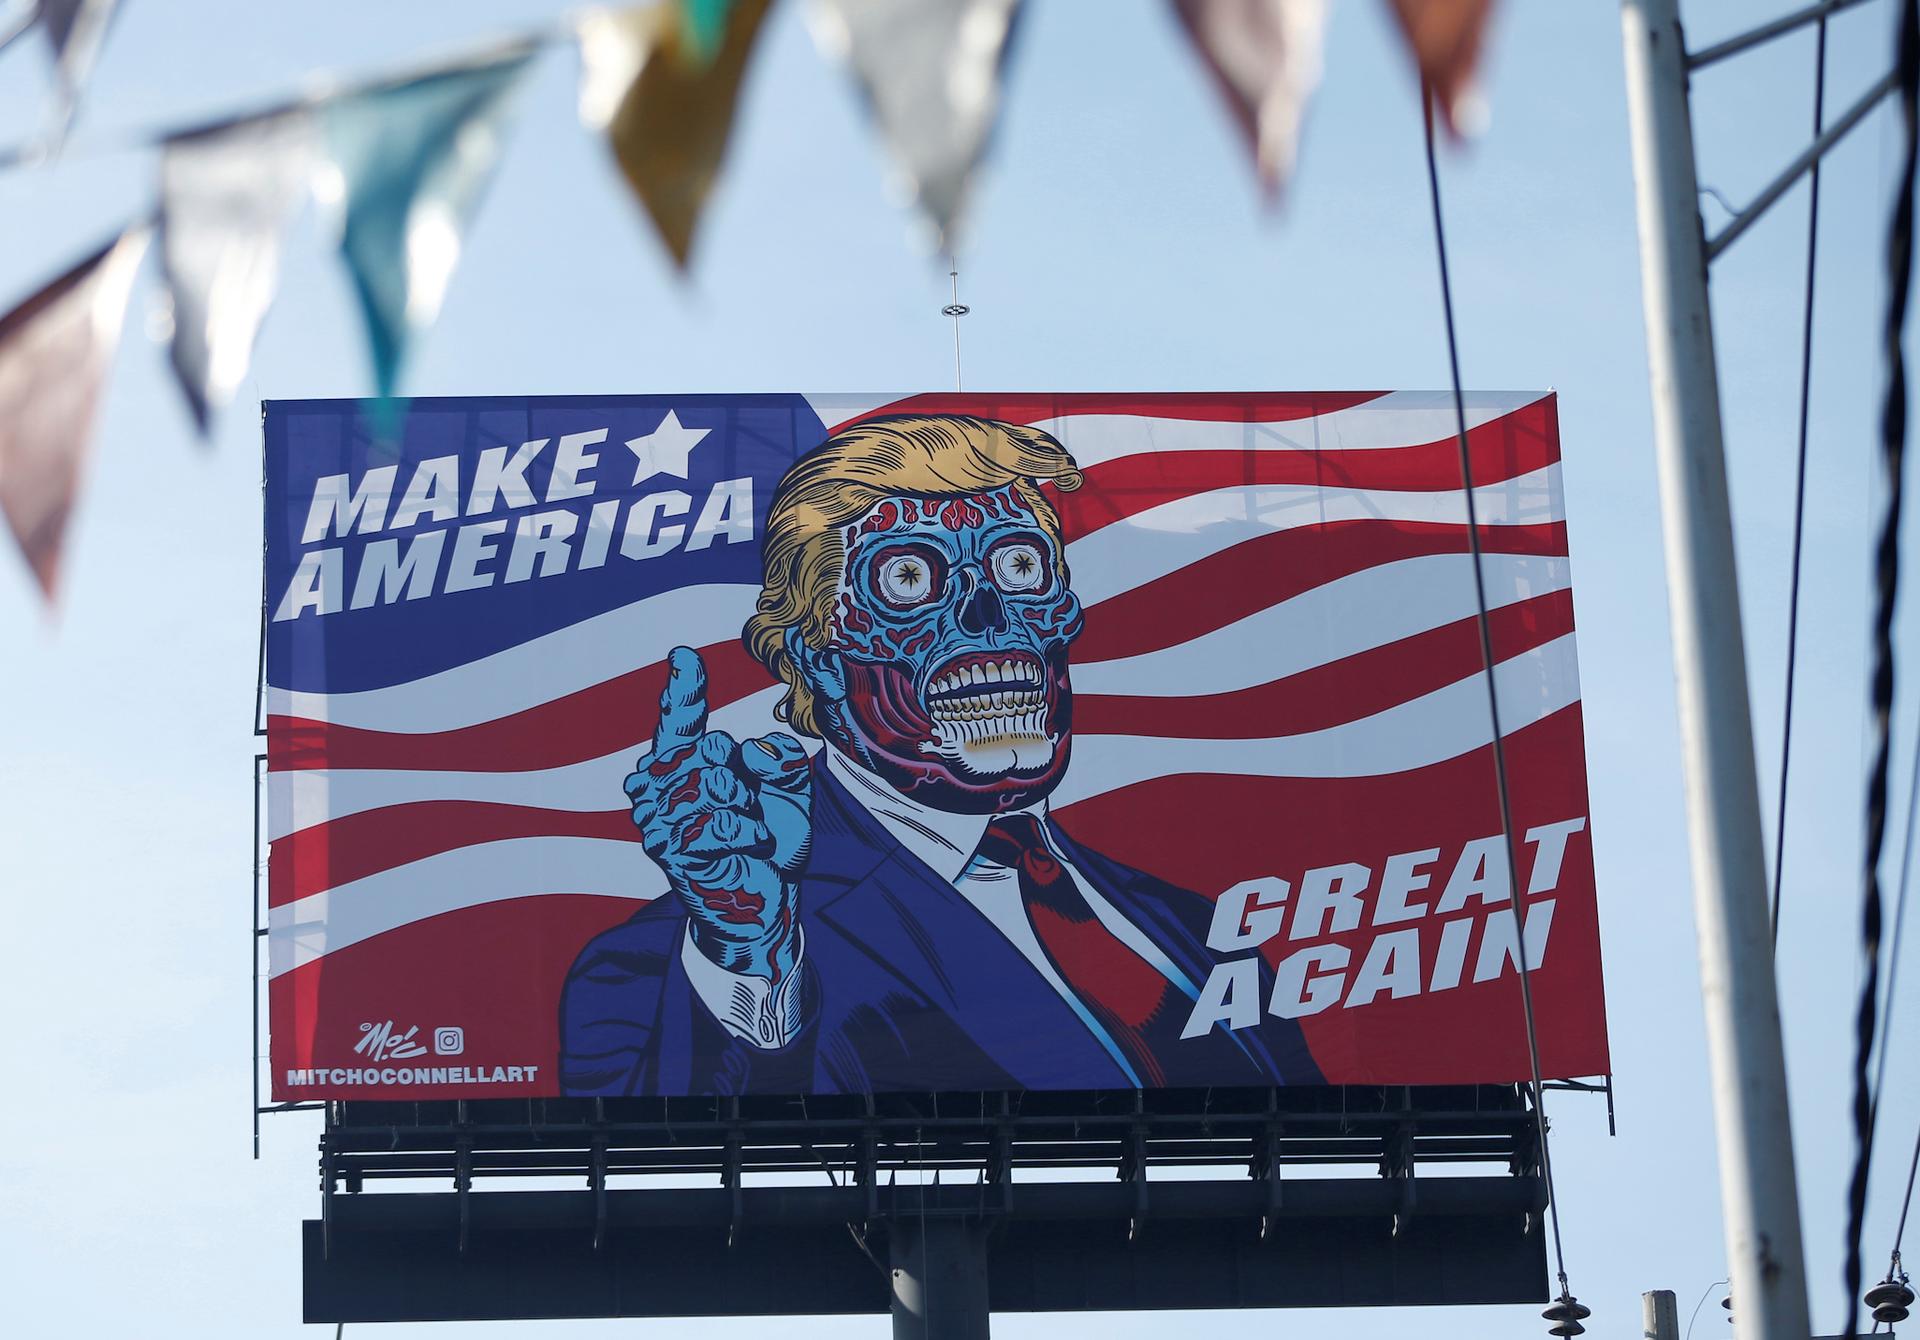 A big billboard shows an illustration depicting President Donald Trump, along Periférico avenue in Mexico City, Mexico, on July 28, 2017.